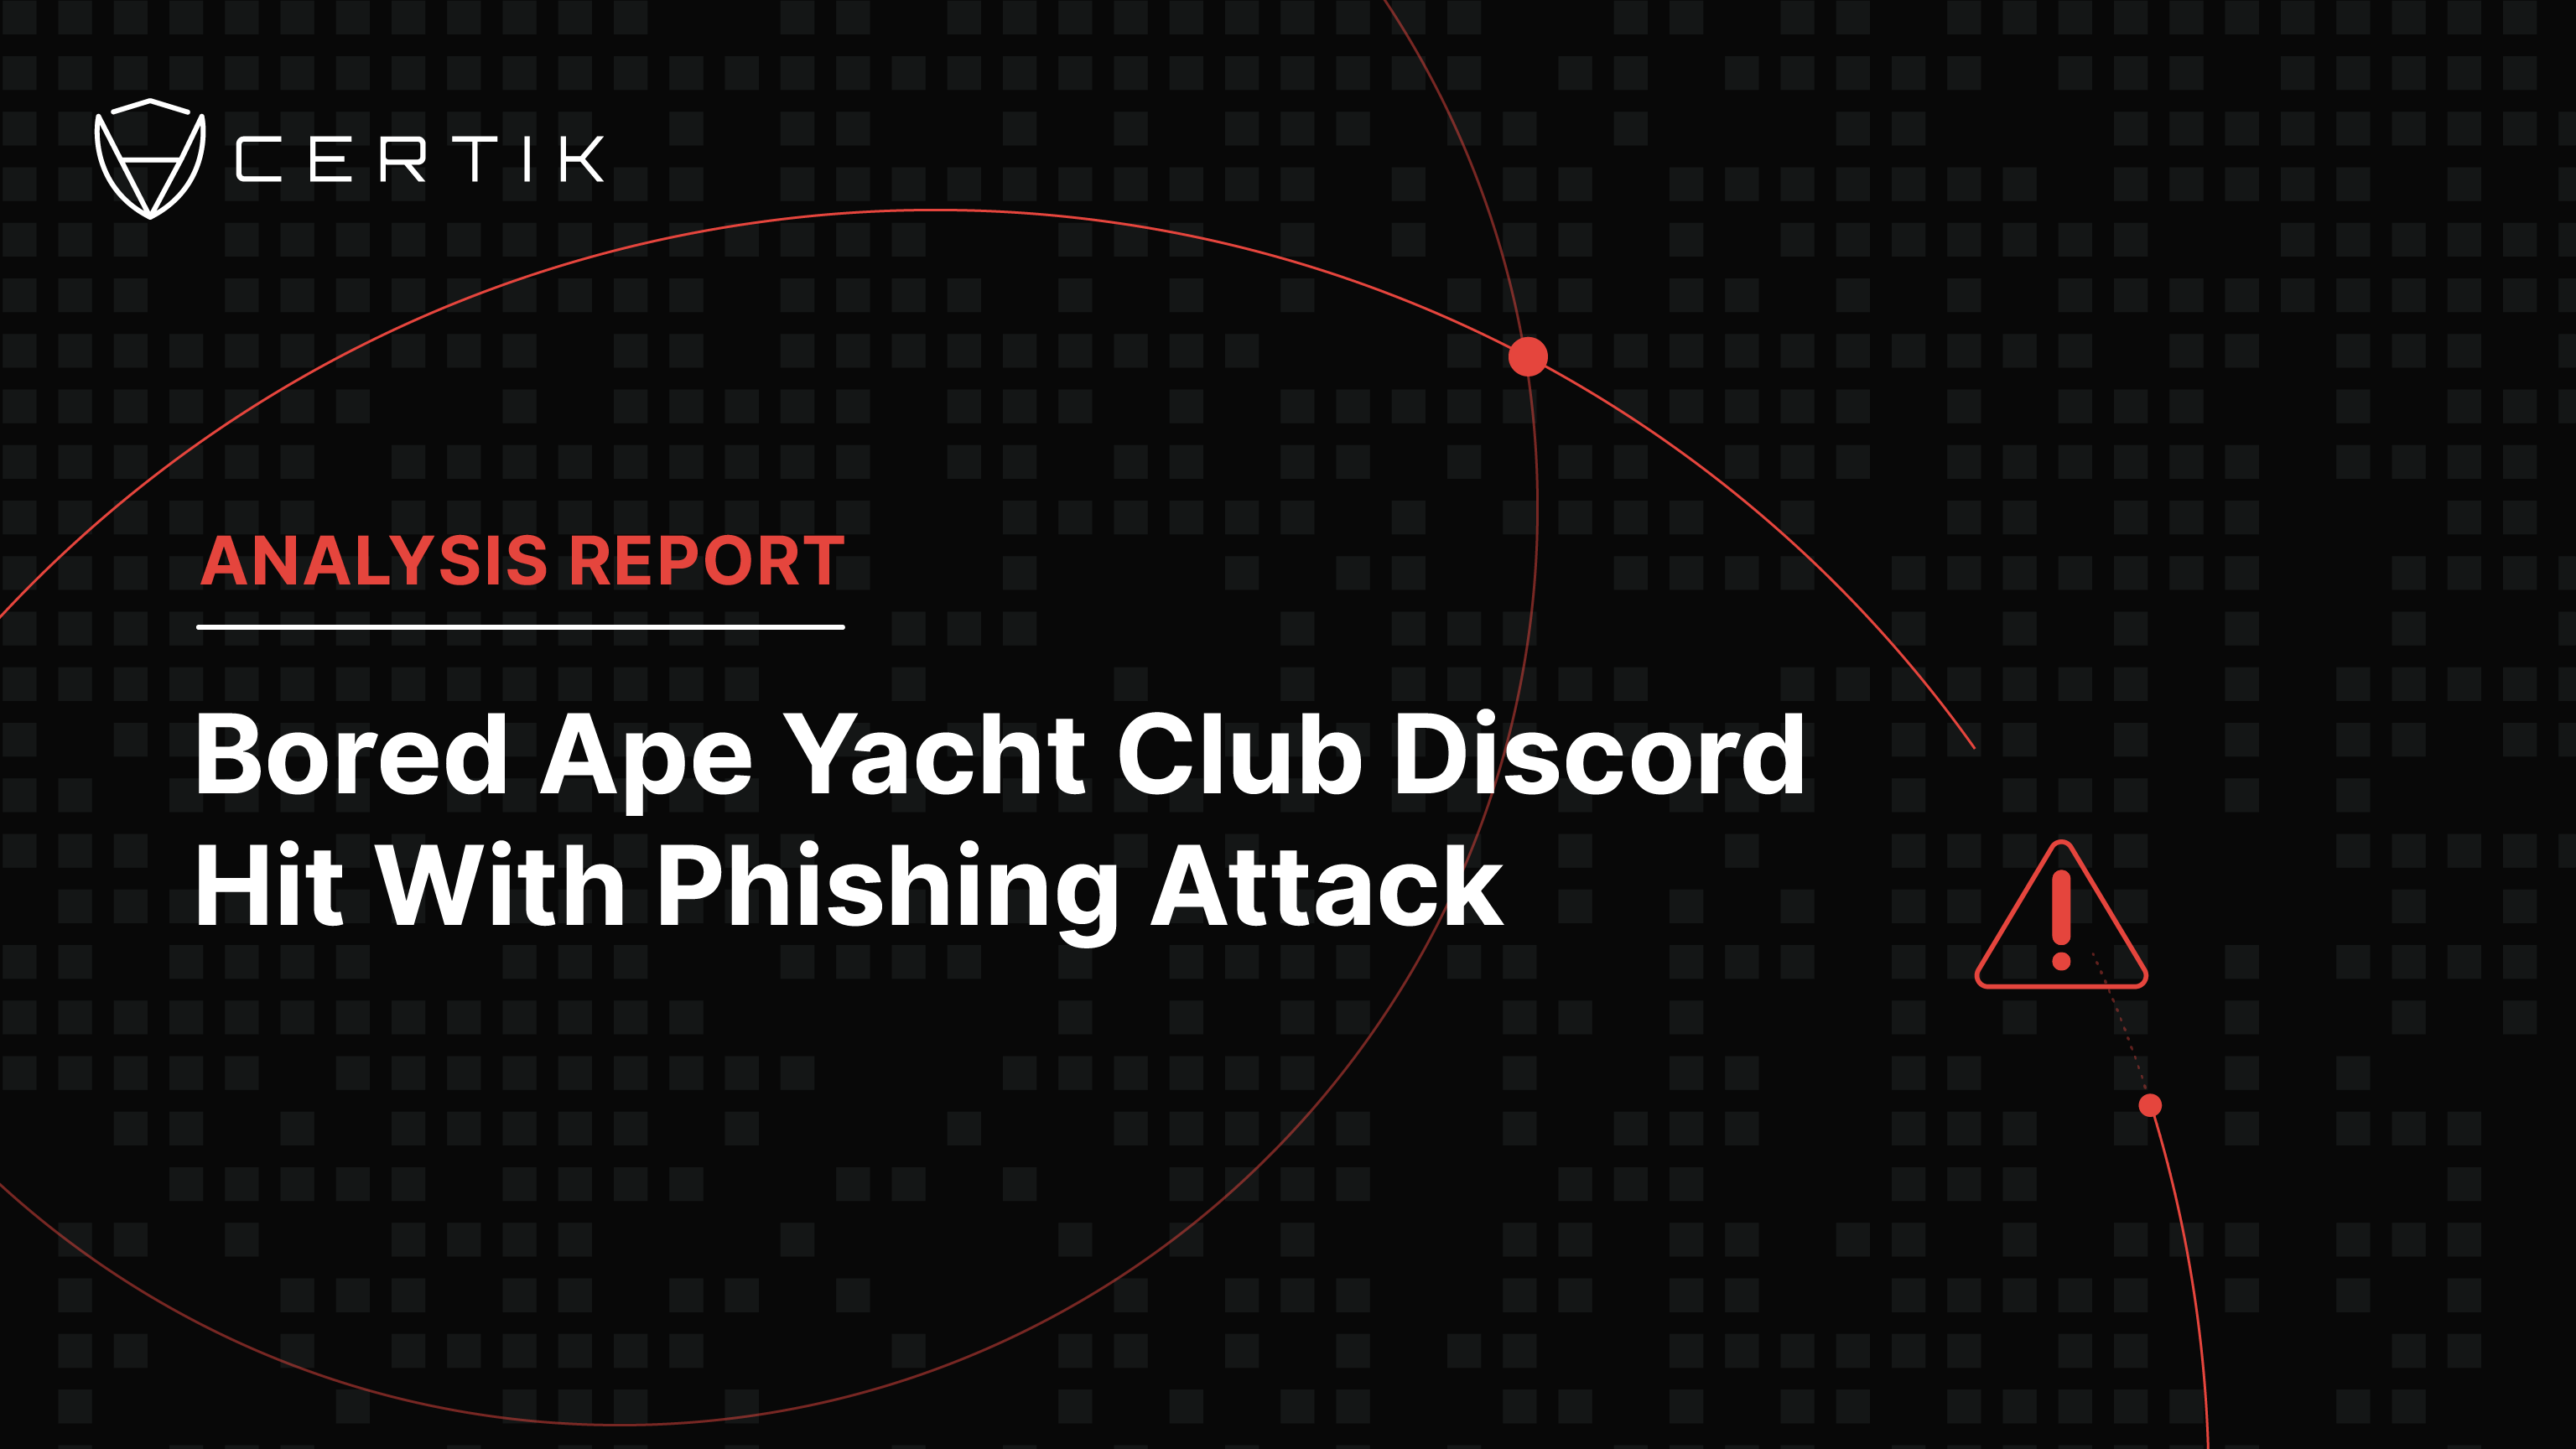 Bored Ape Yacht Club Discord Hit With Phishing Attack